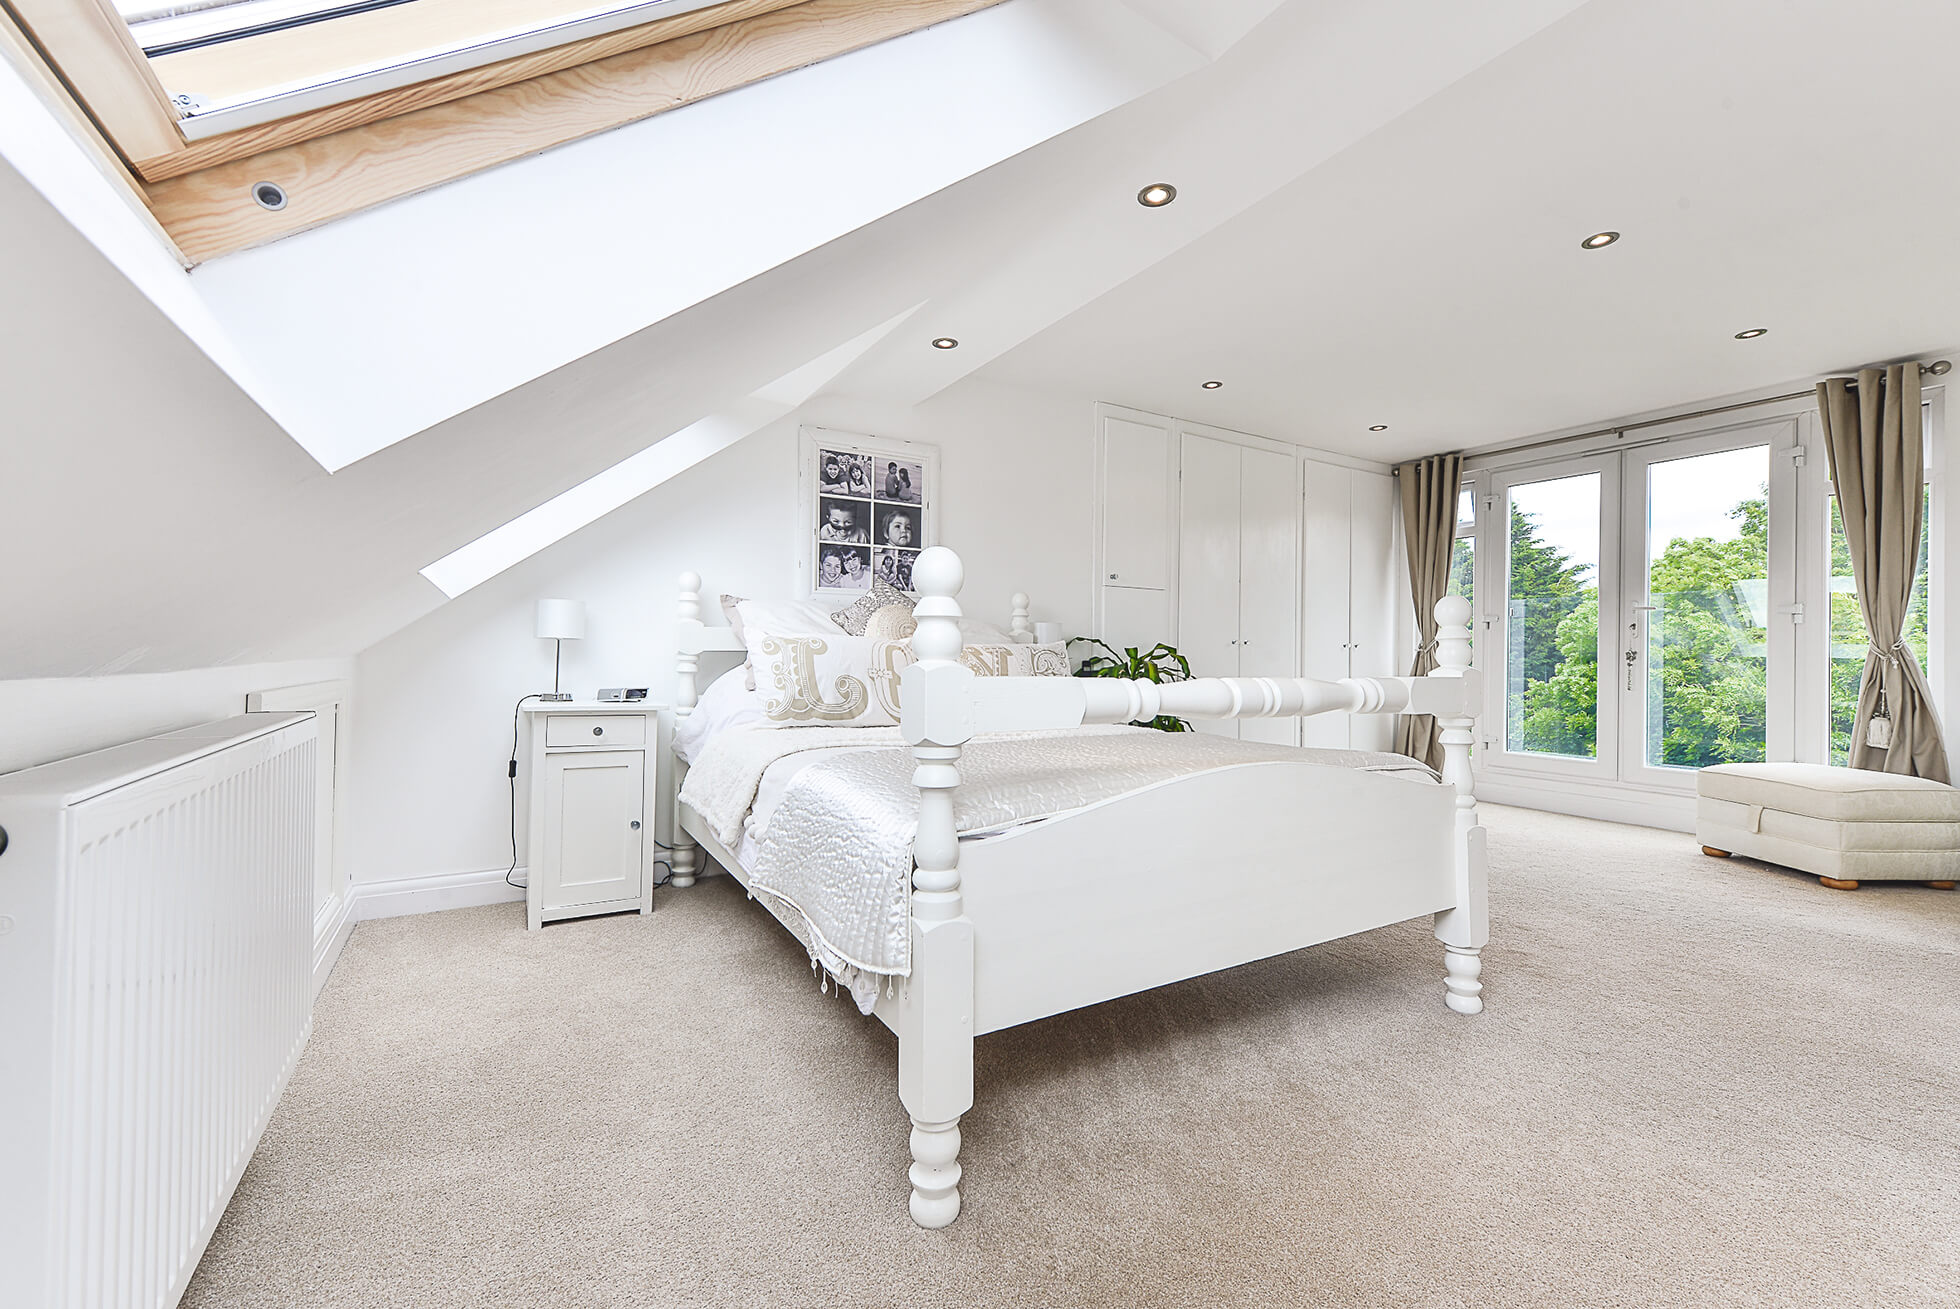 Do you have a question about converting your Loft in Sandon? Here are the most popular questions asked by our clients.